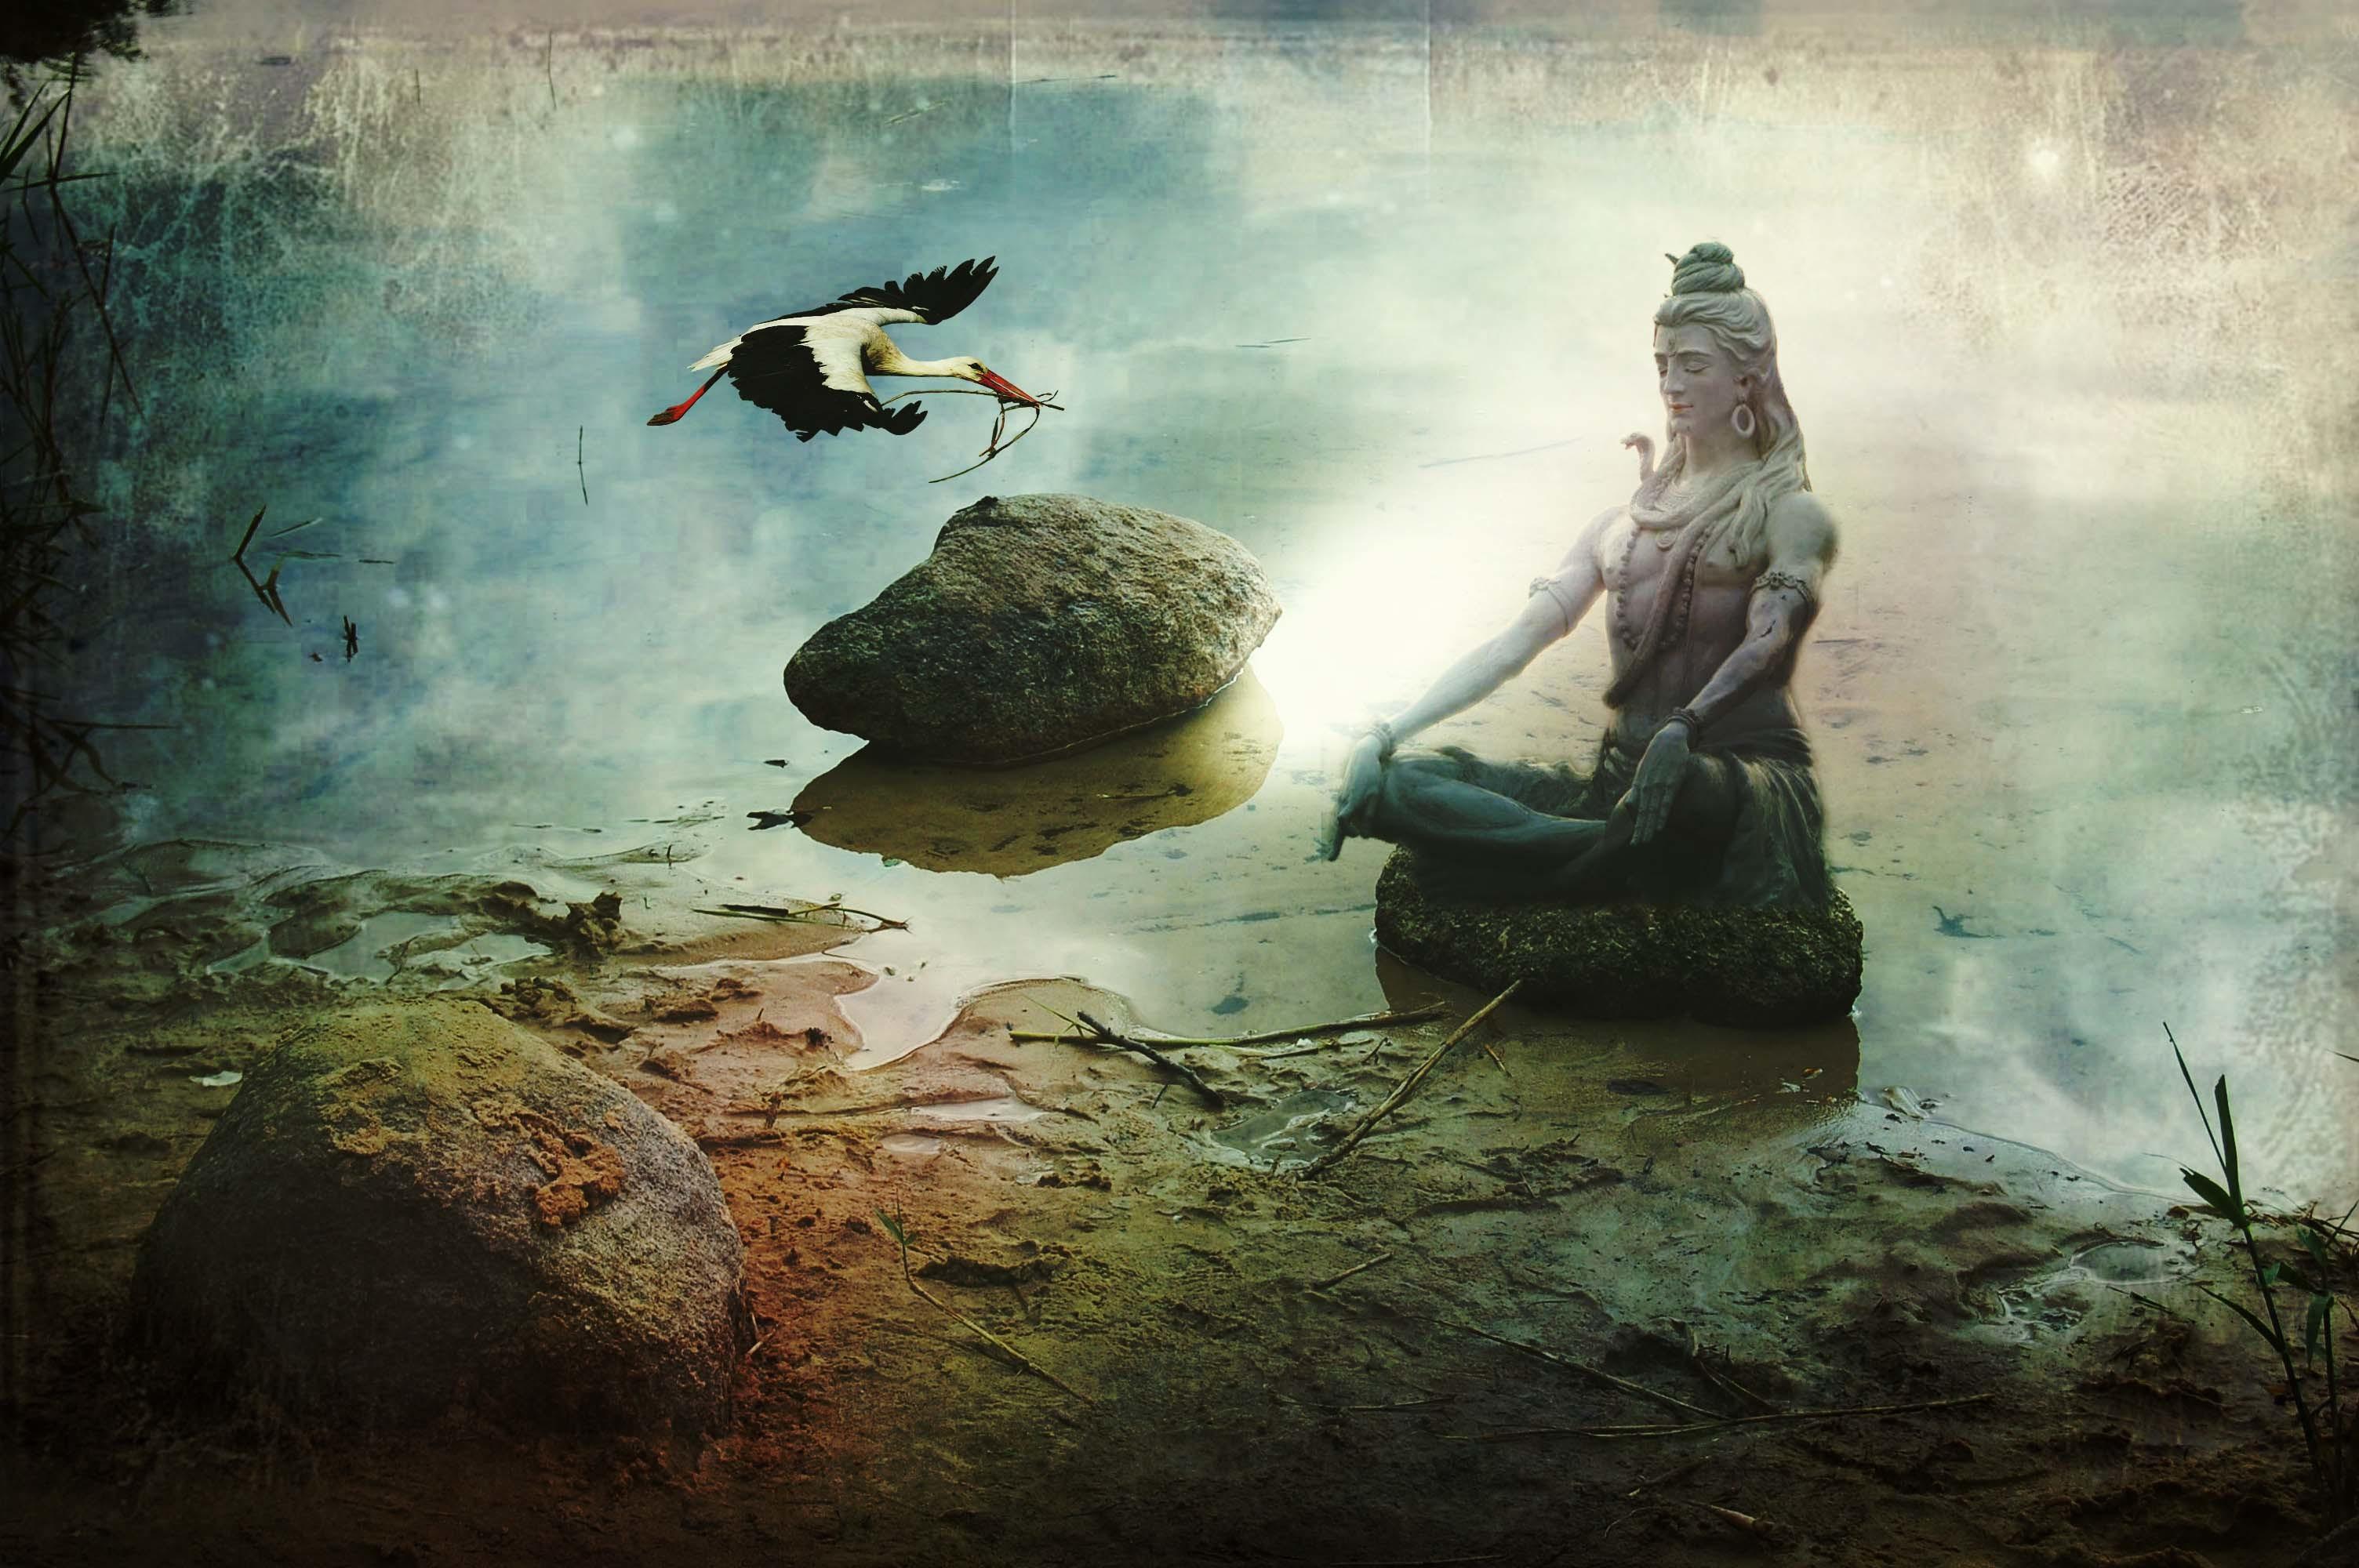 Lord Shiva Wallpapers High Resolution